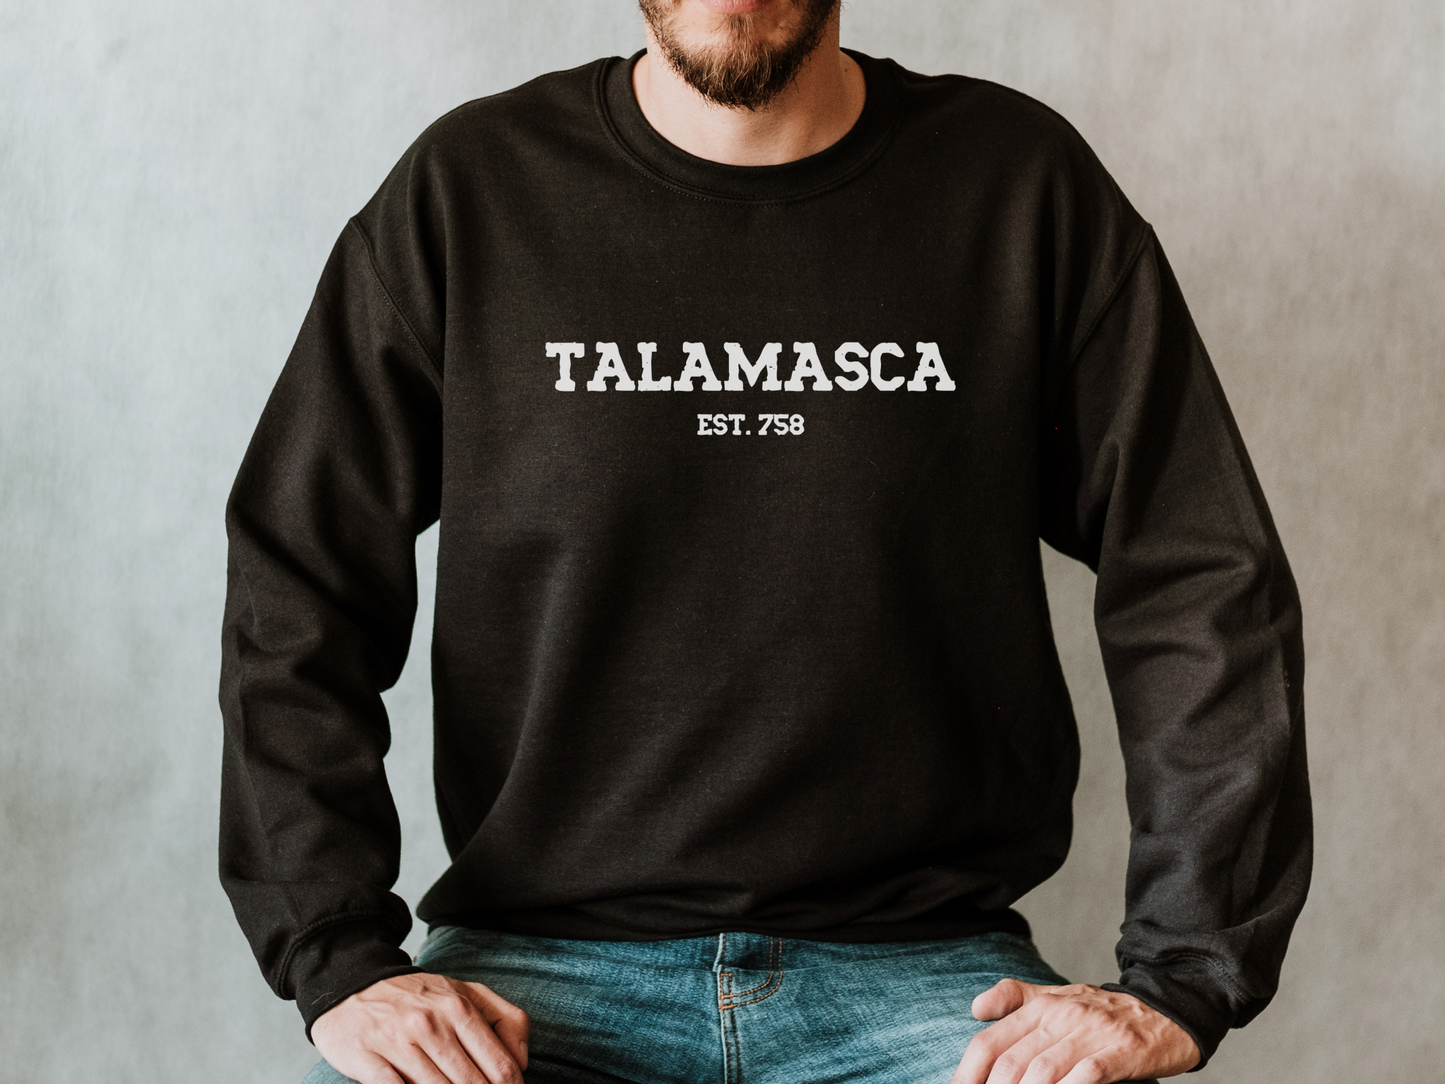 Talamasca Sweatshirt, Interview with the Vampire, The Witching Hour, Mayfair Witches, Anne Rice, Bookish Gifts, Bookish Sweatshirt